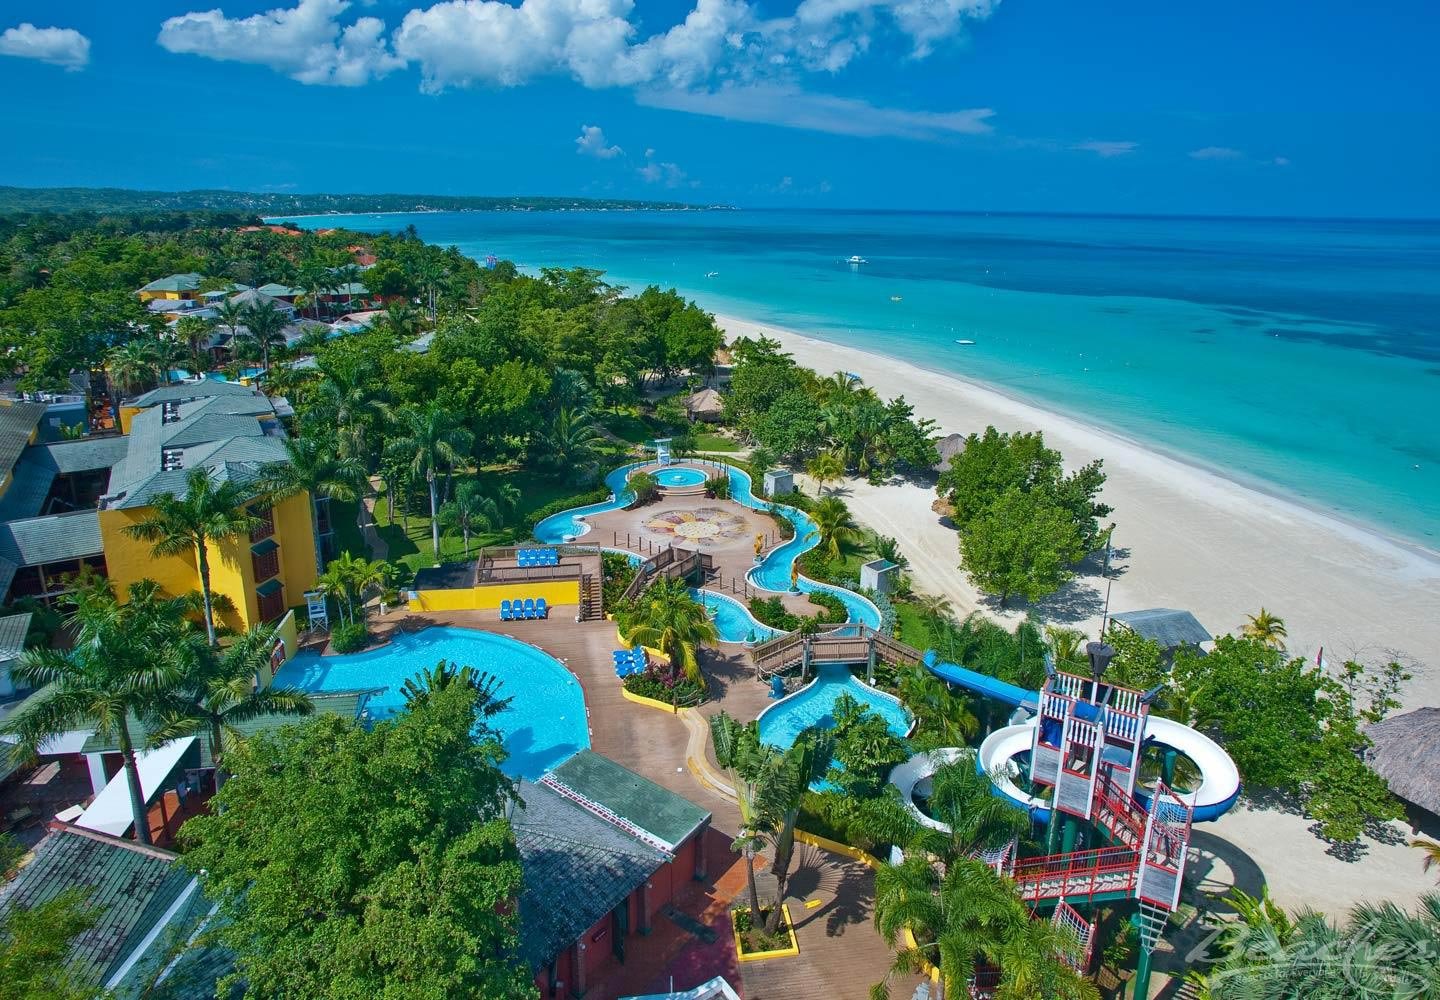 Best All-inclusive Resorts for Families in the Caribbean